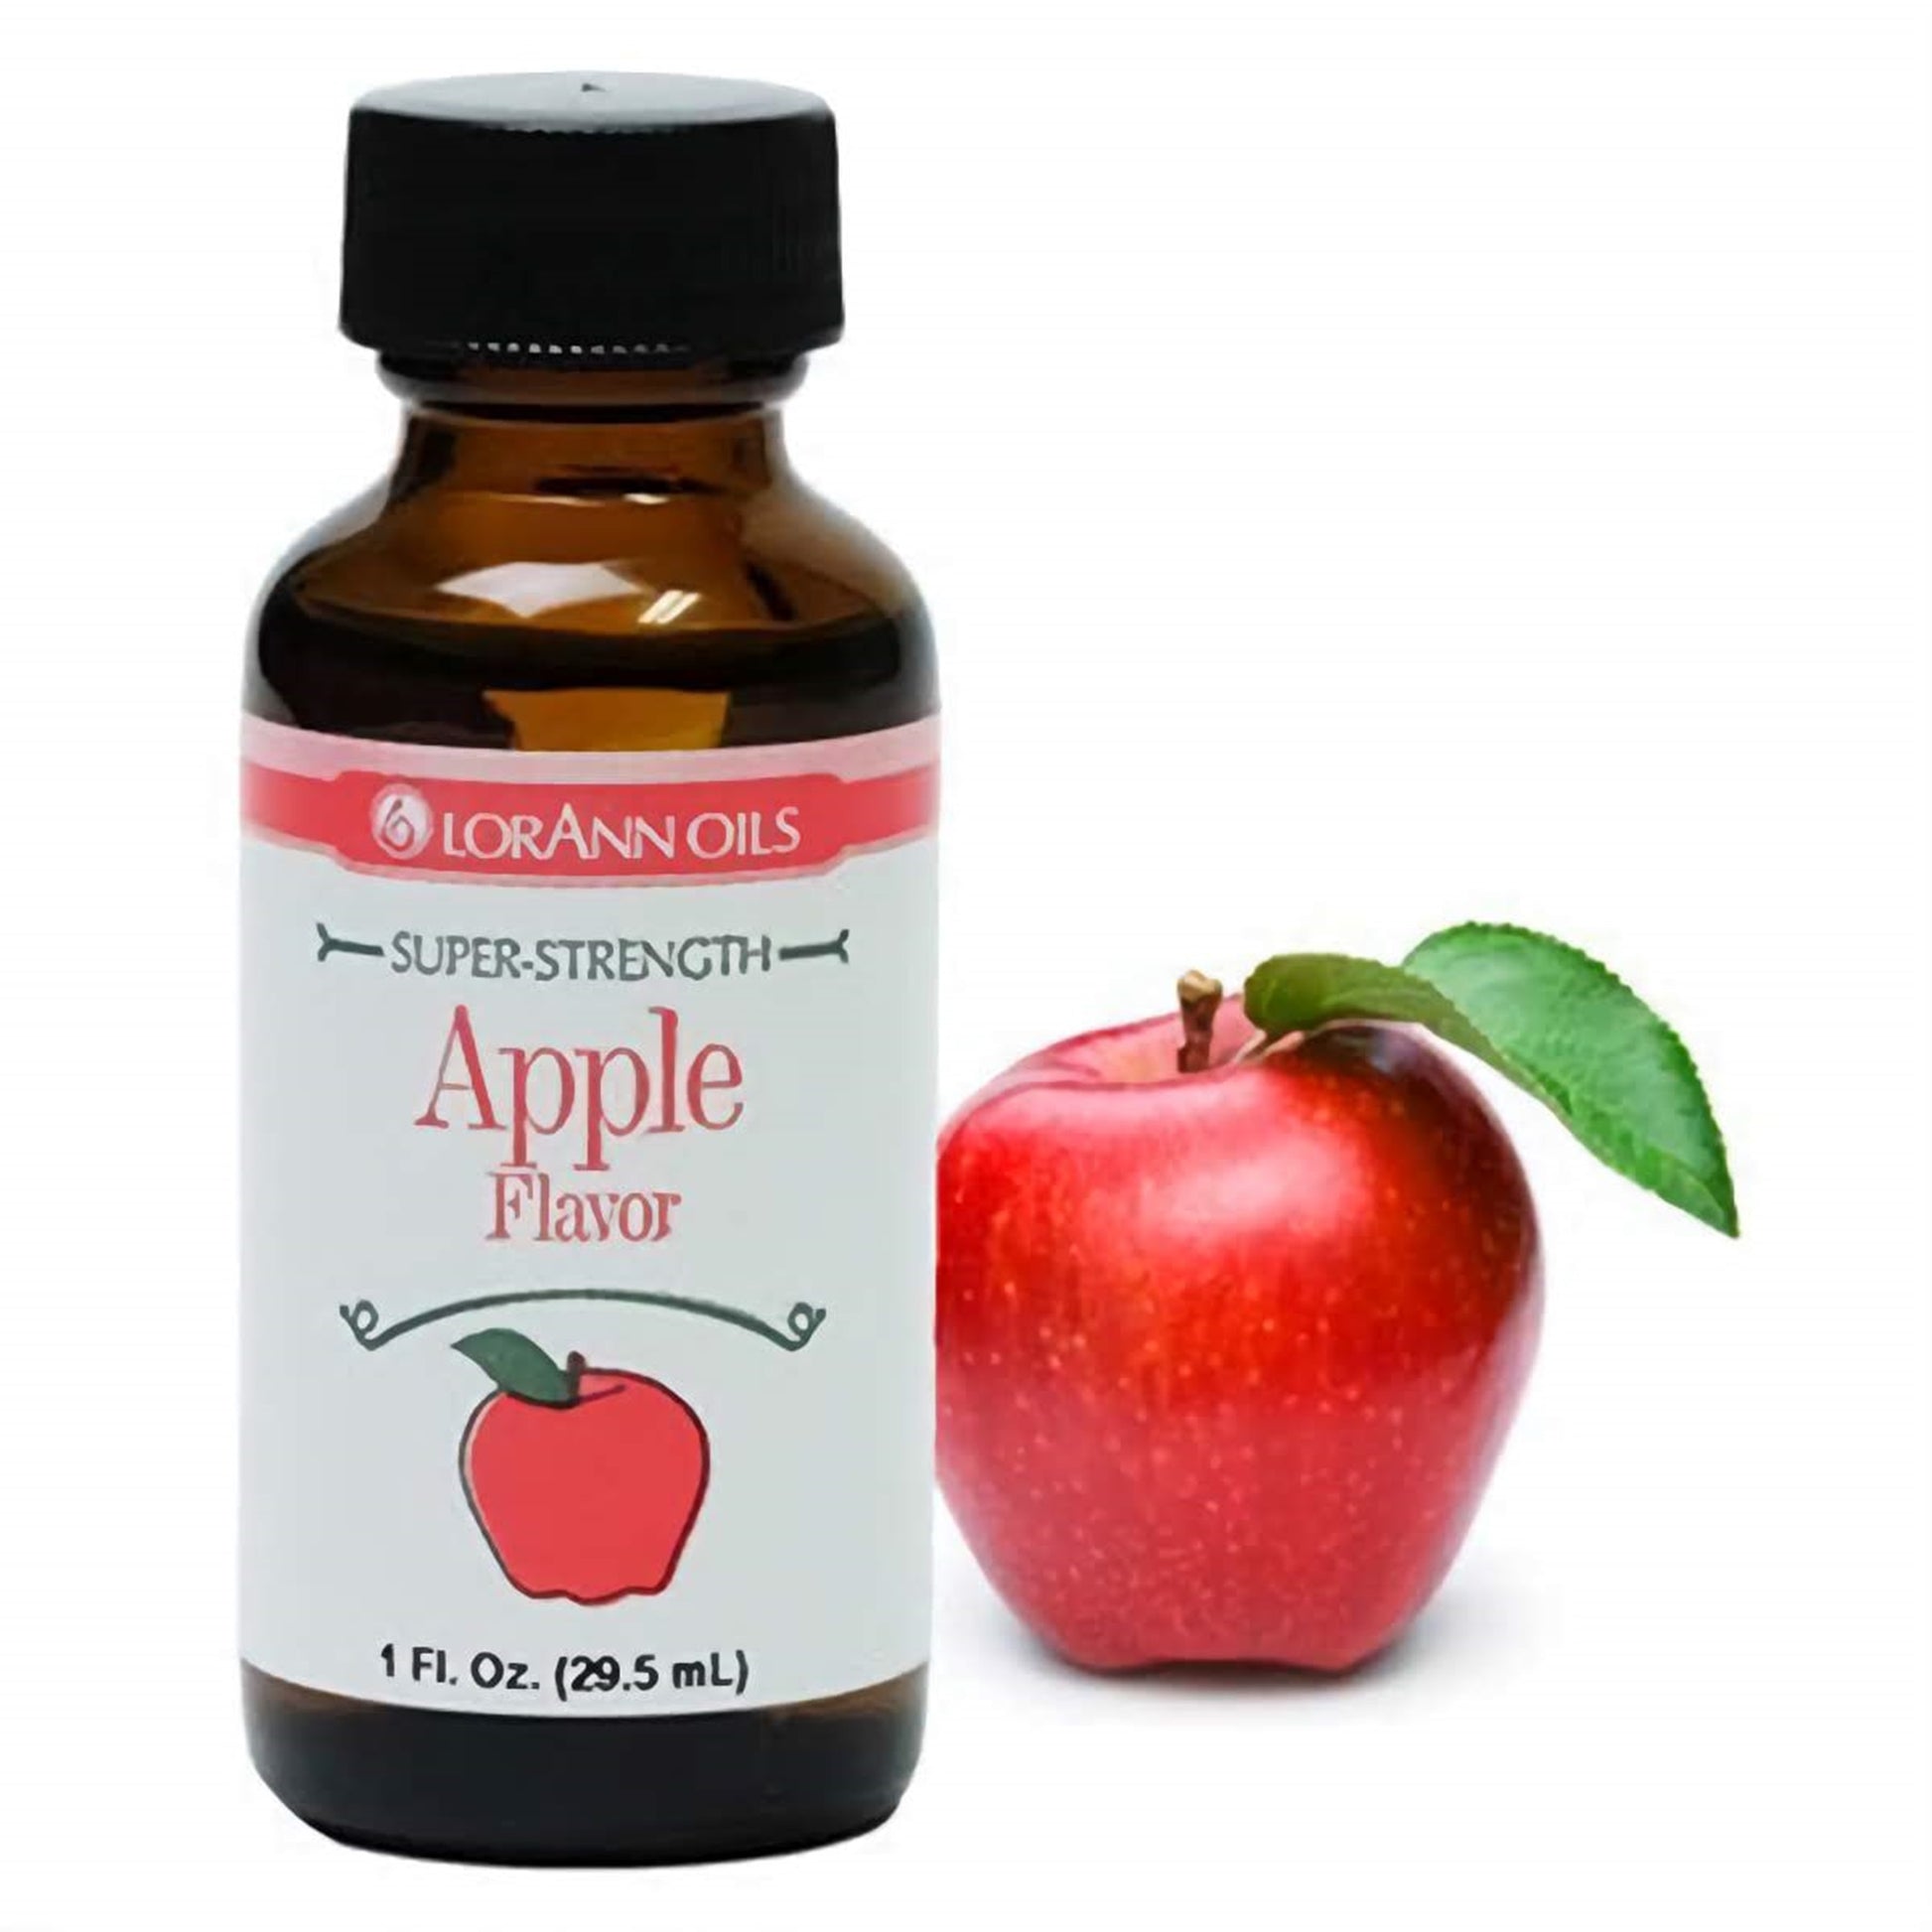 A bottle of LorAnn Oils Super Strength Apple Flavor, 1 fl oz, displayed next to a fresh, red apple with a green leaf, indicating the natural flavor inspiration.